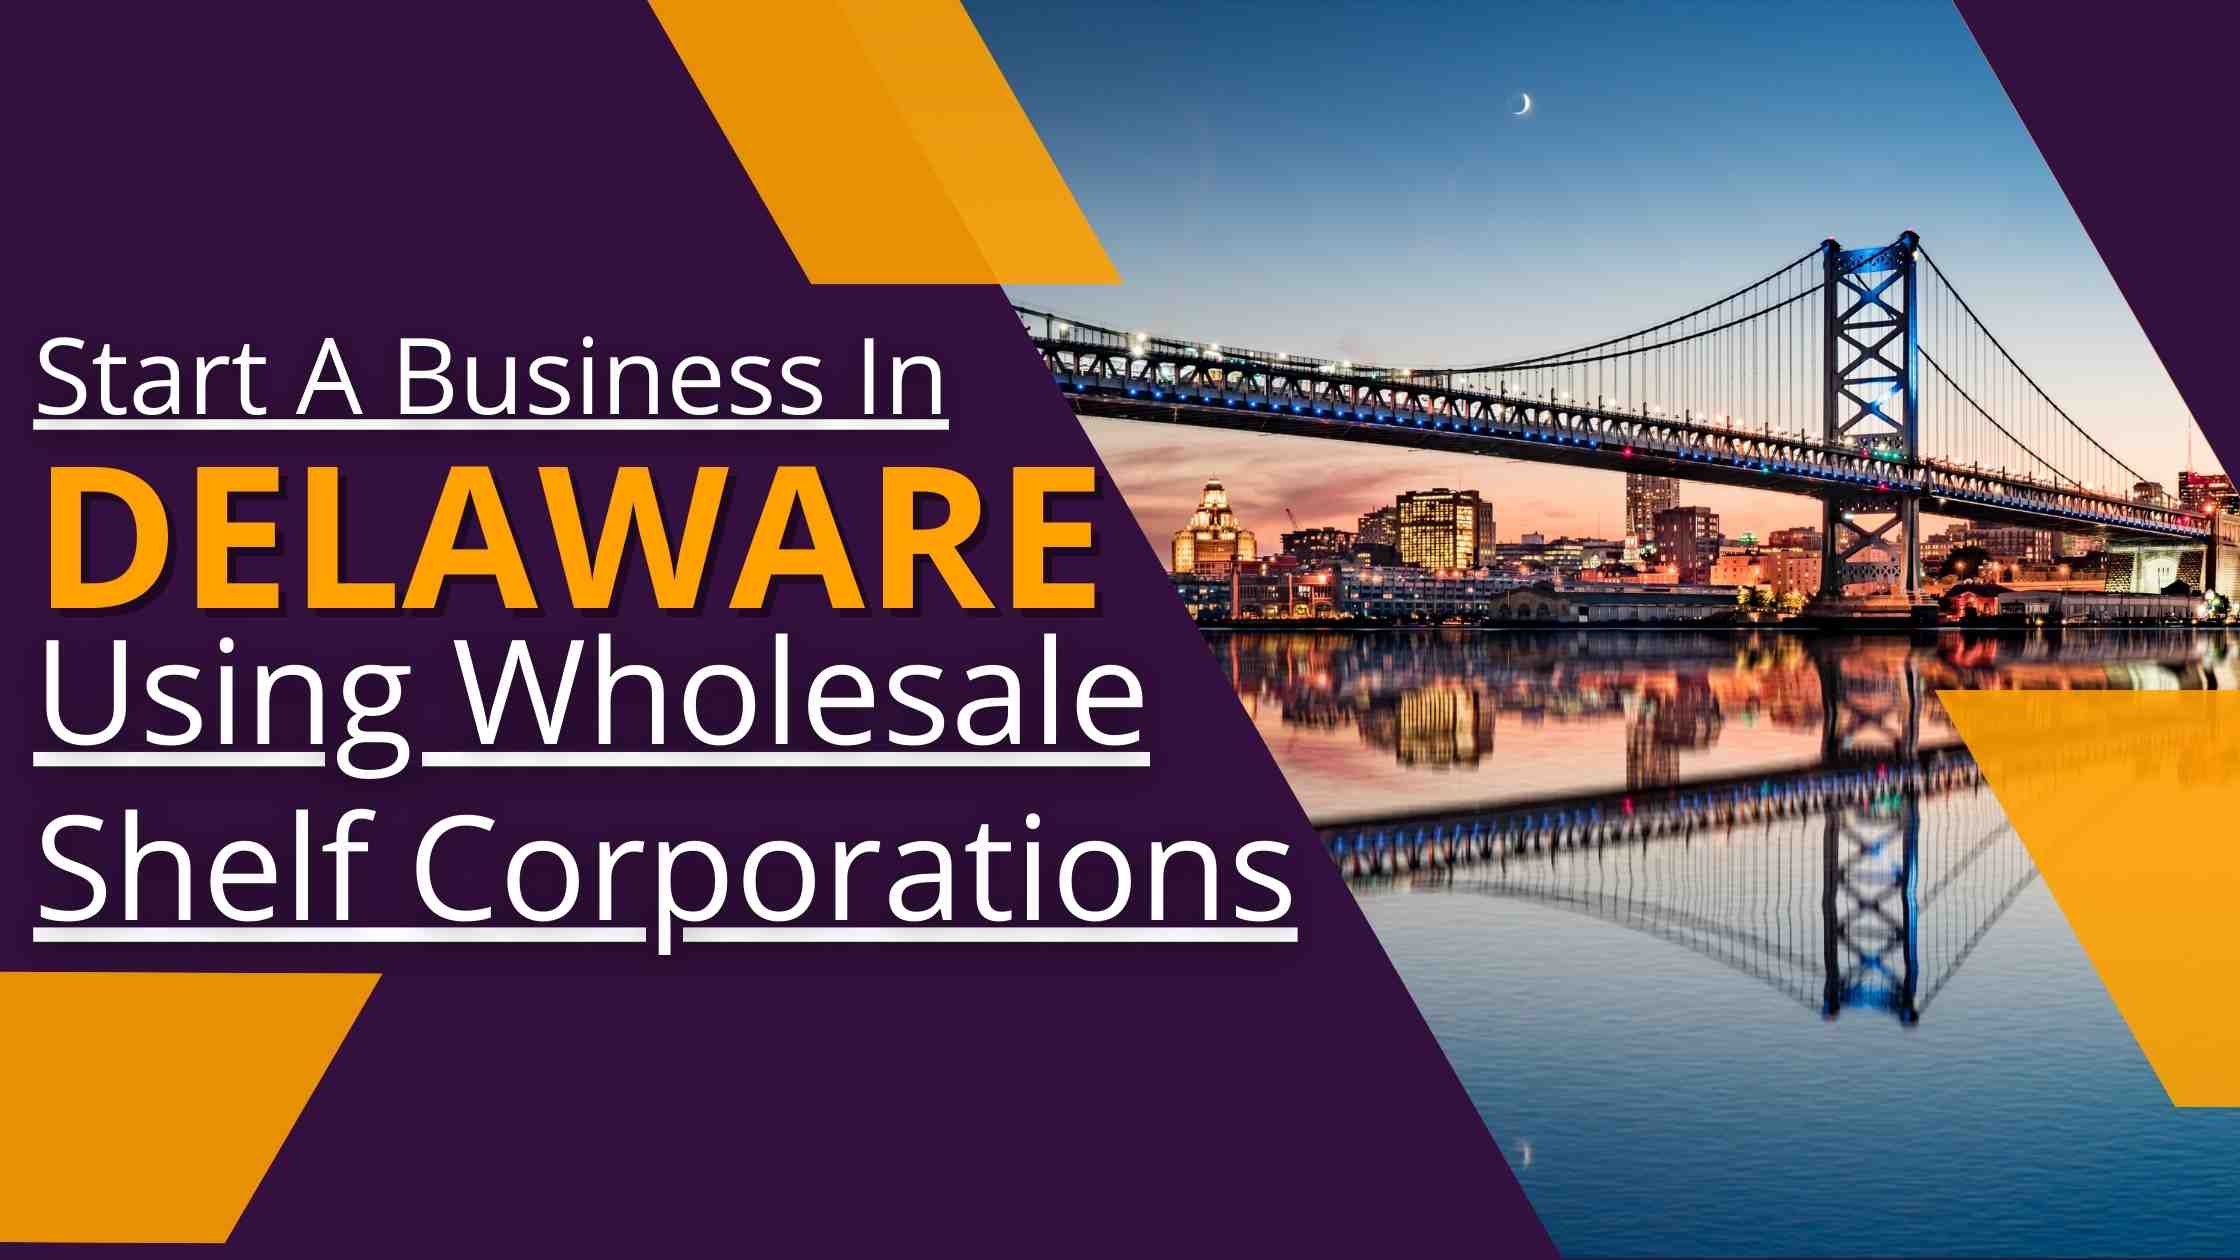 How to start a business in Delaware using Wholesale Shelf Corporations